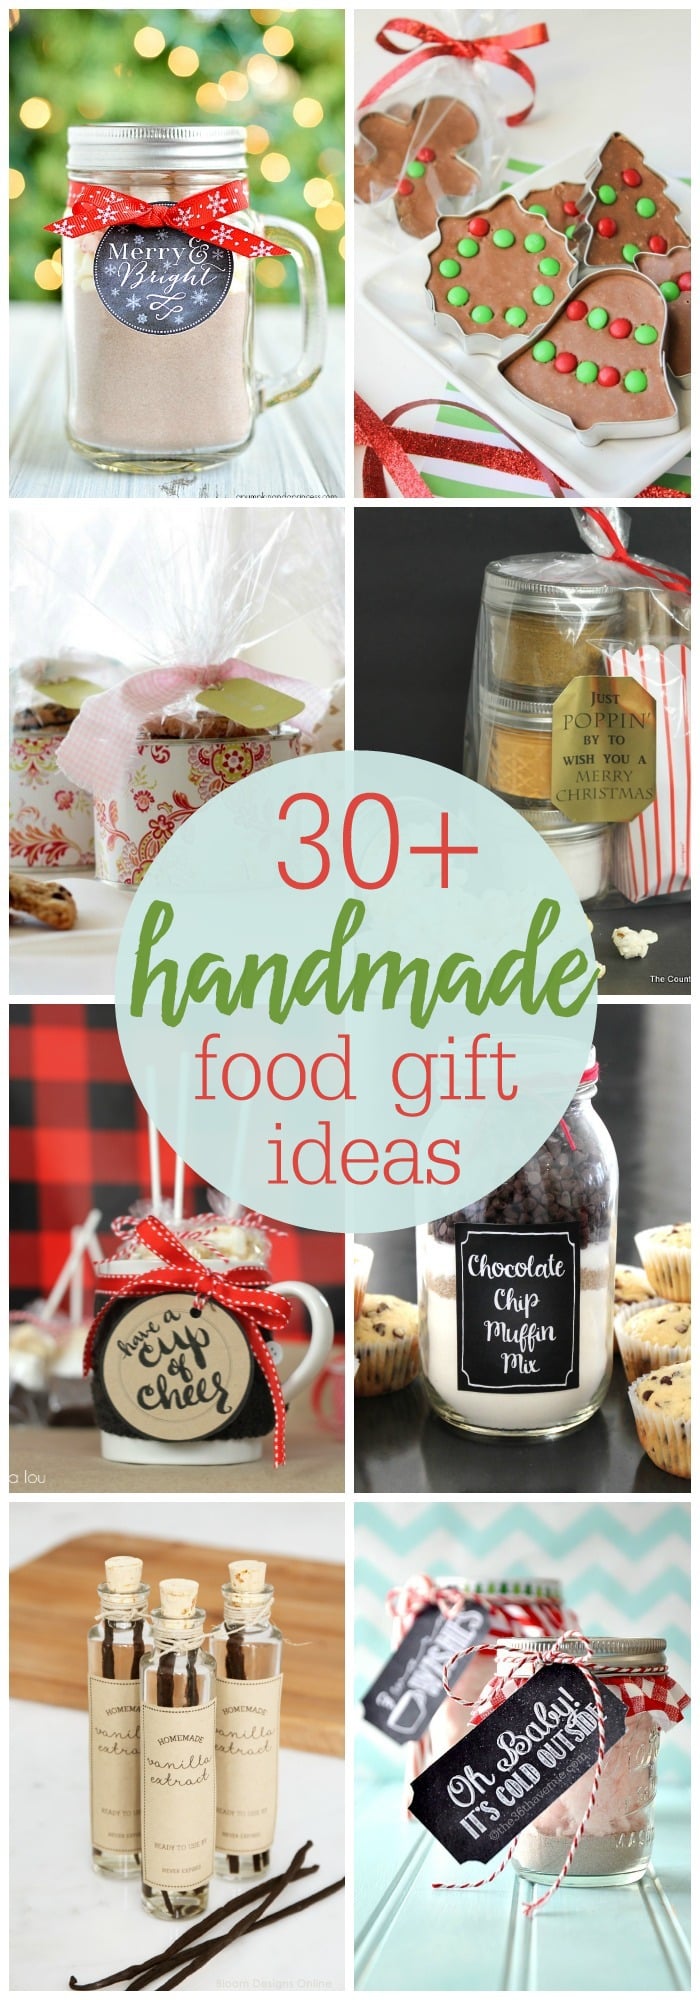 30+ Handmade Food Gift Ideas - so many simple, cute and inexpensive gift ideas to make and give to friends, family and neighbors. 